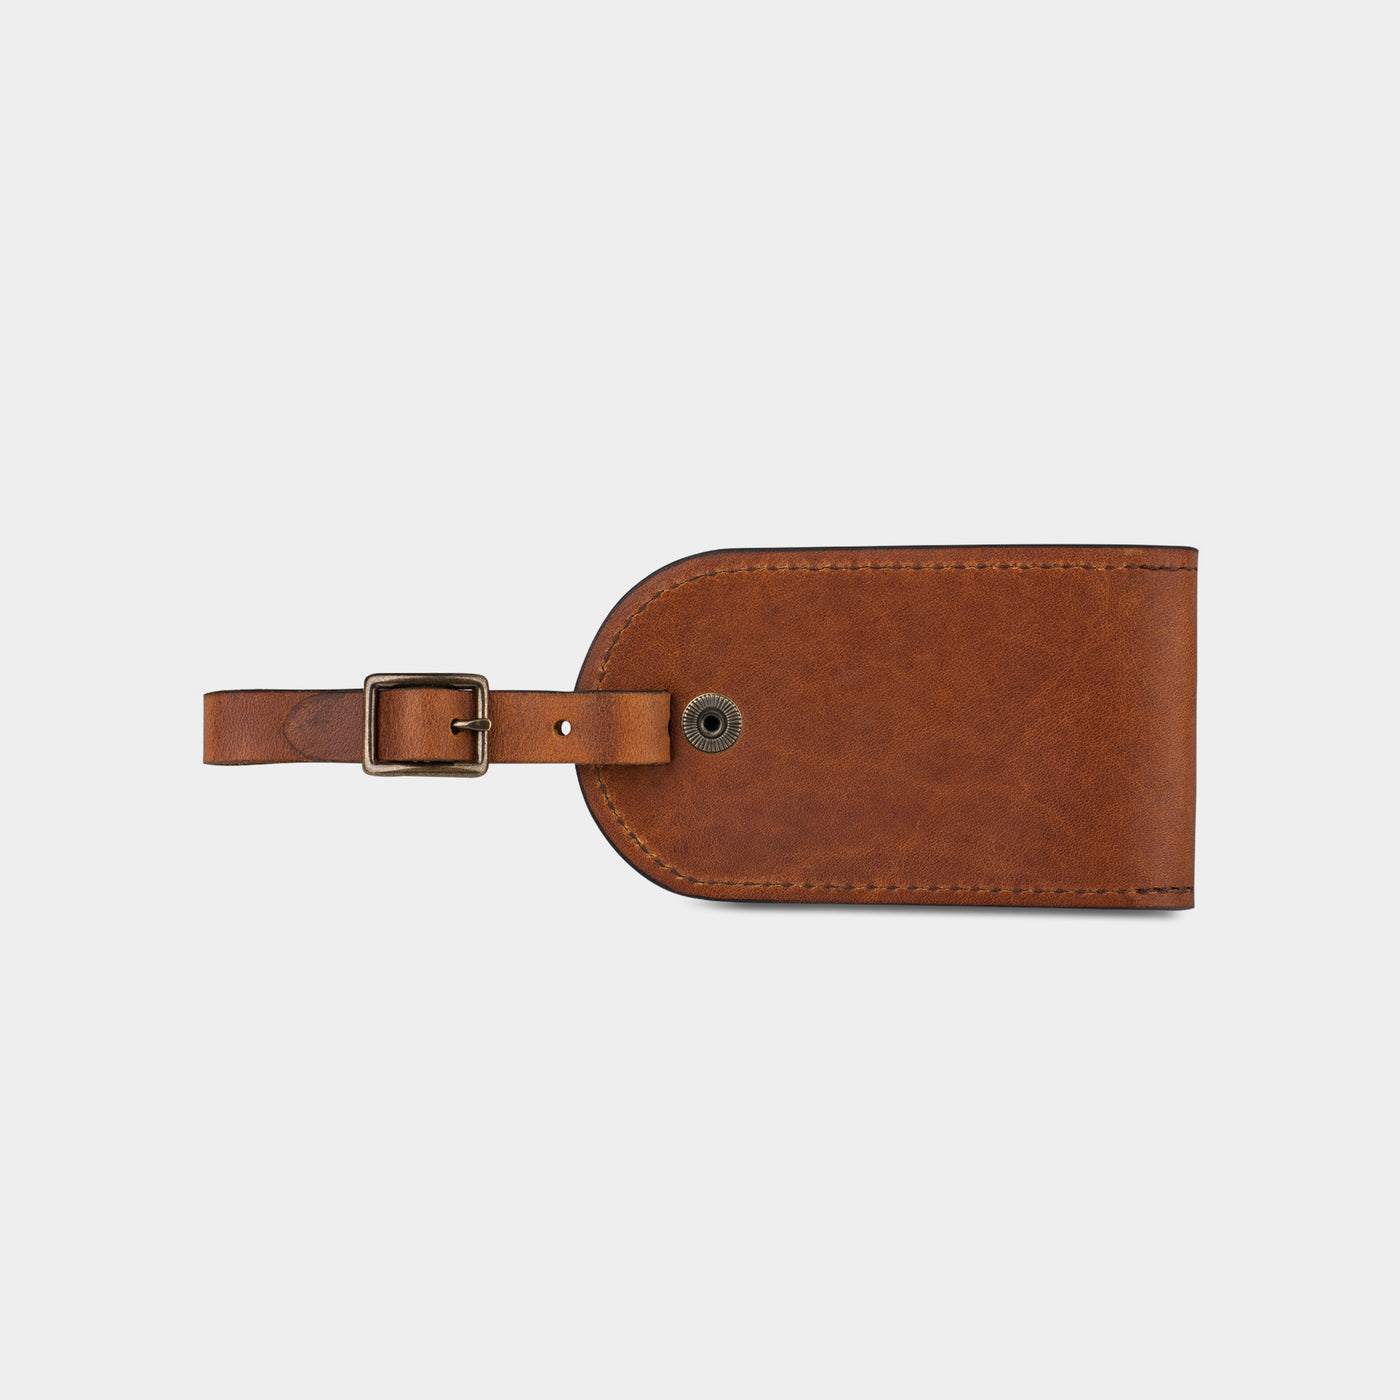 University of Michigan "M"Leather Luggage Tag | Heritage Gear